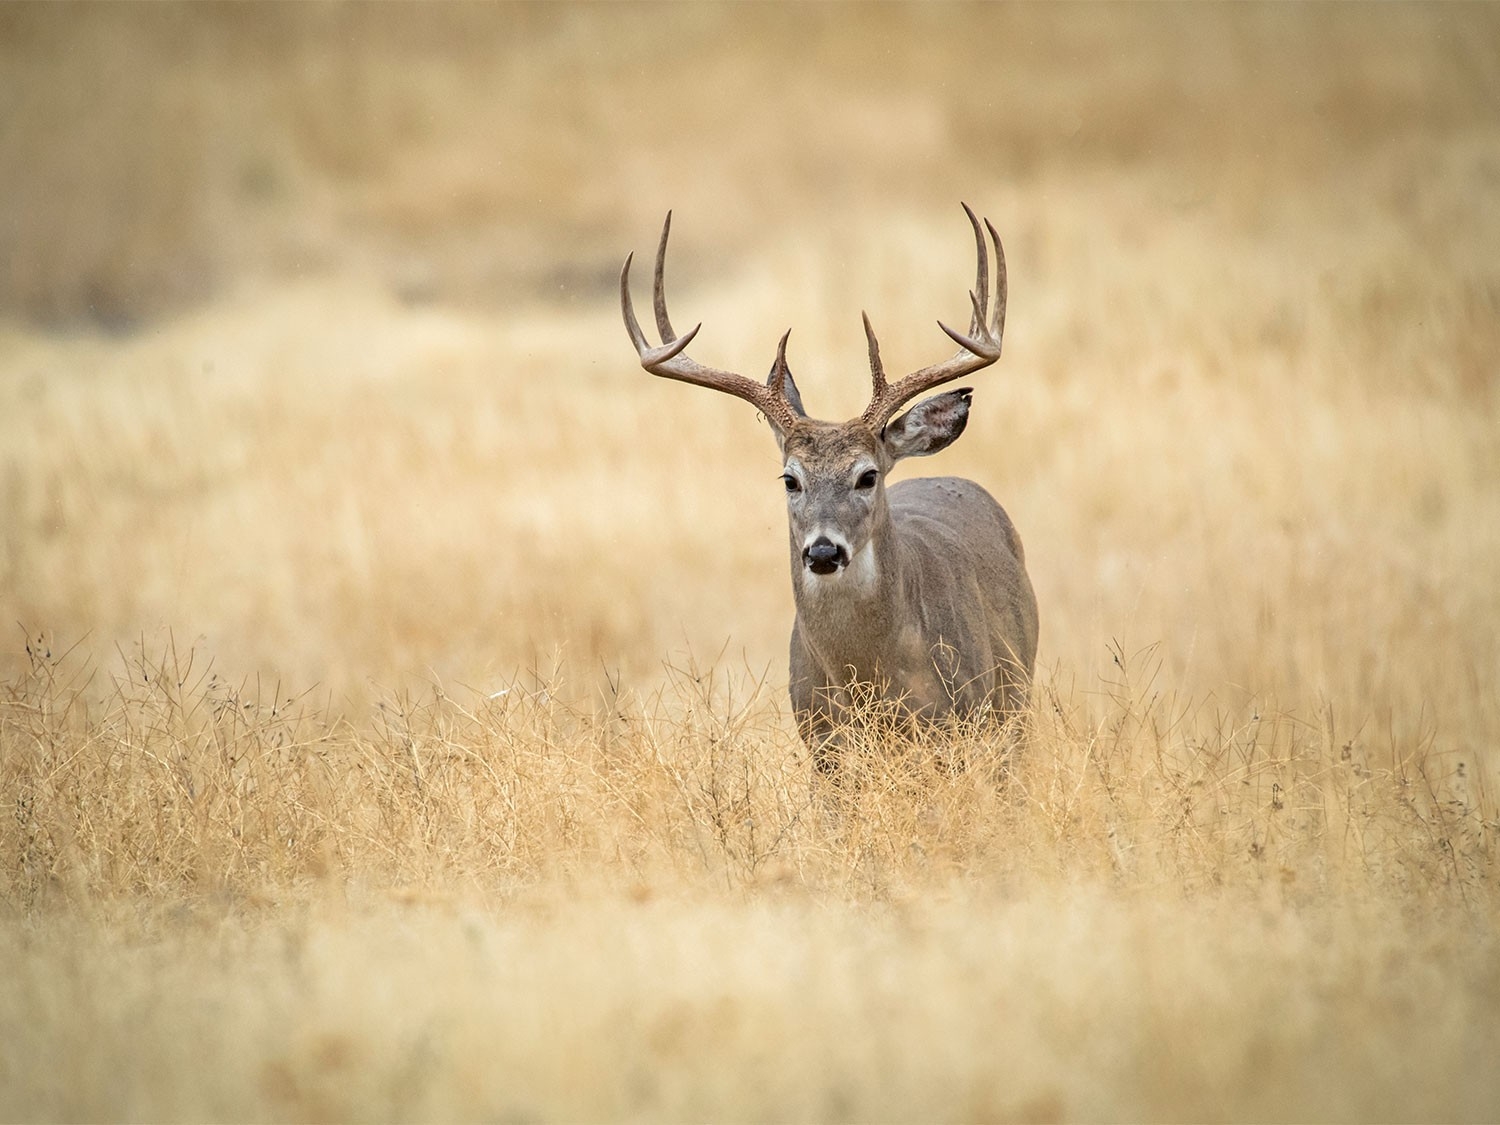 The 7 Best Days Of The 2020 Whitetail Deer Rut | Field &amp; Stream-2021 Whitetail Deer Rut Predictions In Ct